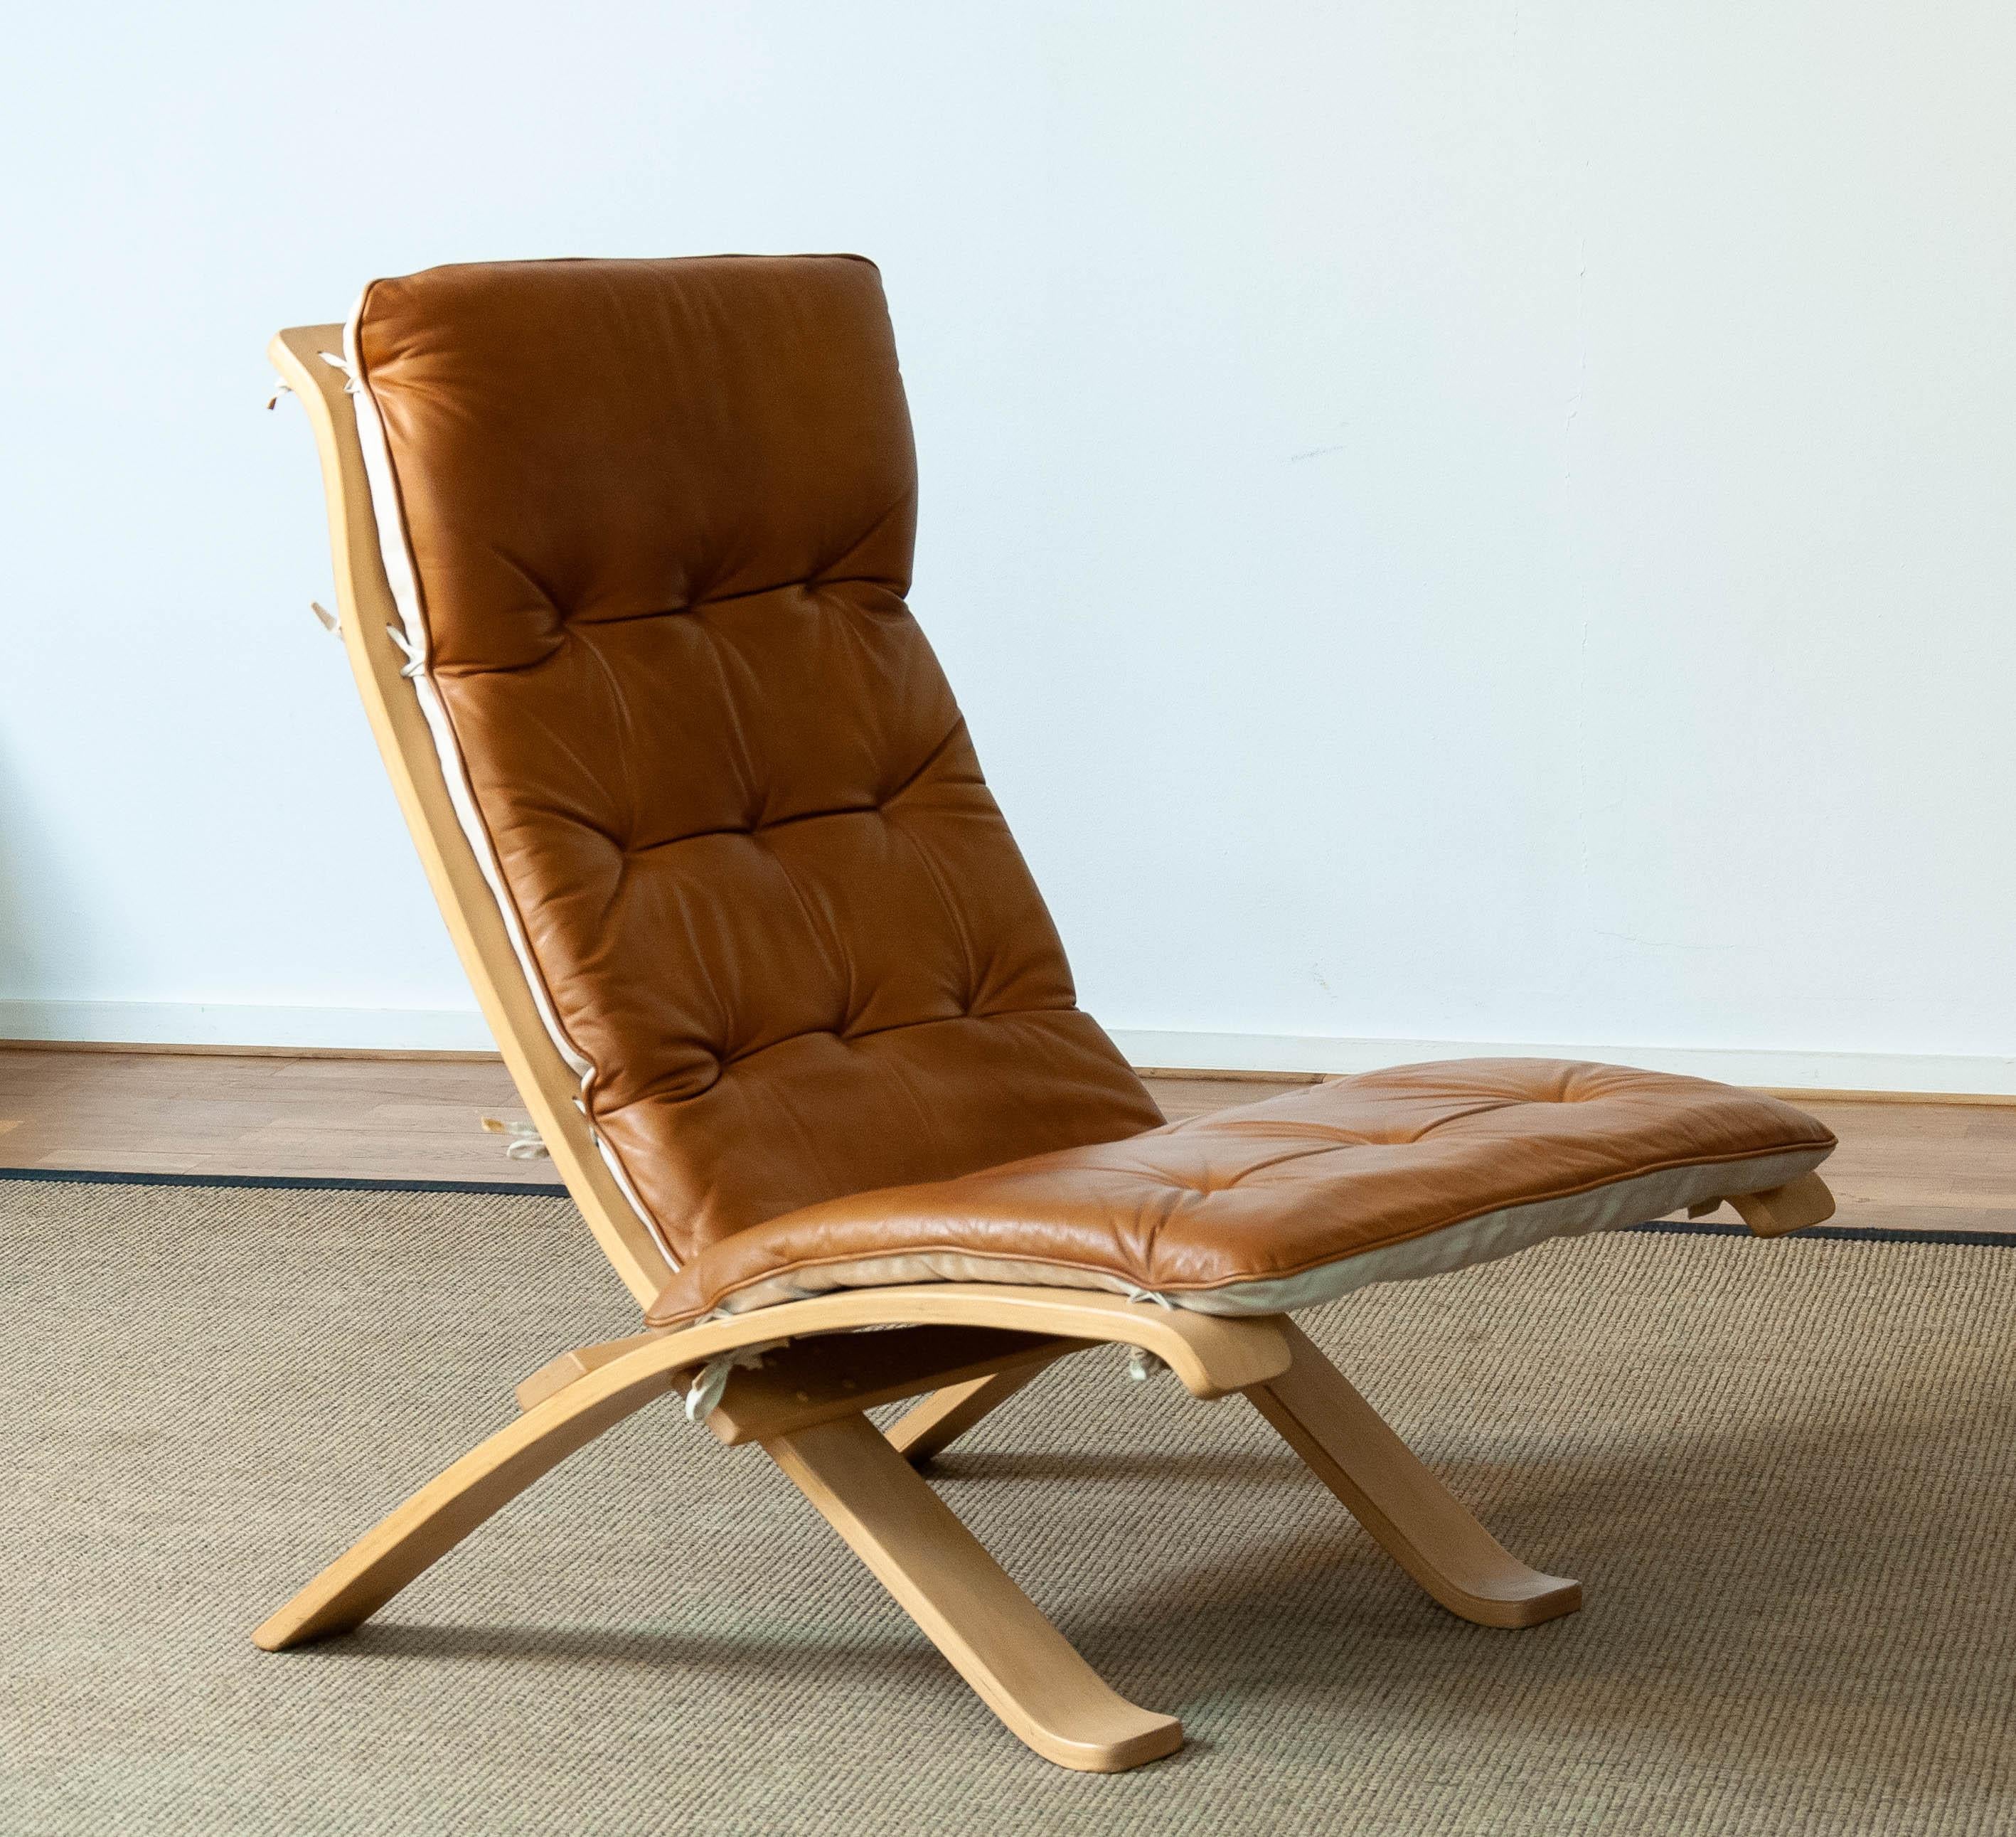 Extremely rare folding - lounge chair designed by Åke Fribytter for Nelo Sweden made of beech and upholstered with cognac leather. This fantastic solution to get a extremely comfortable chair in you living room only when needed is wel thought true